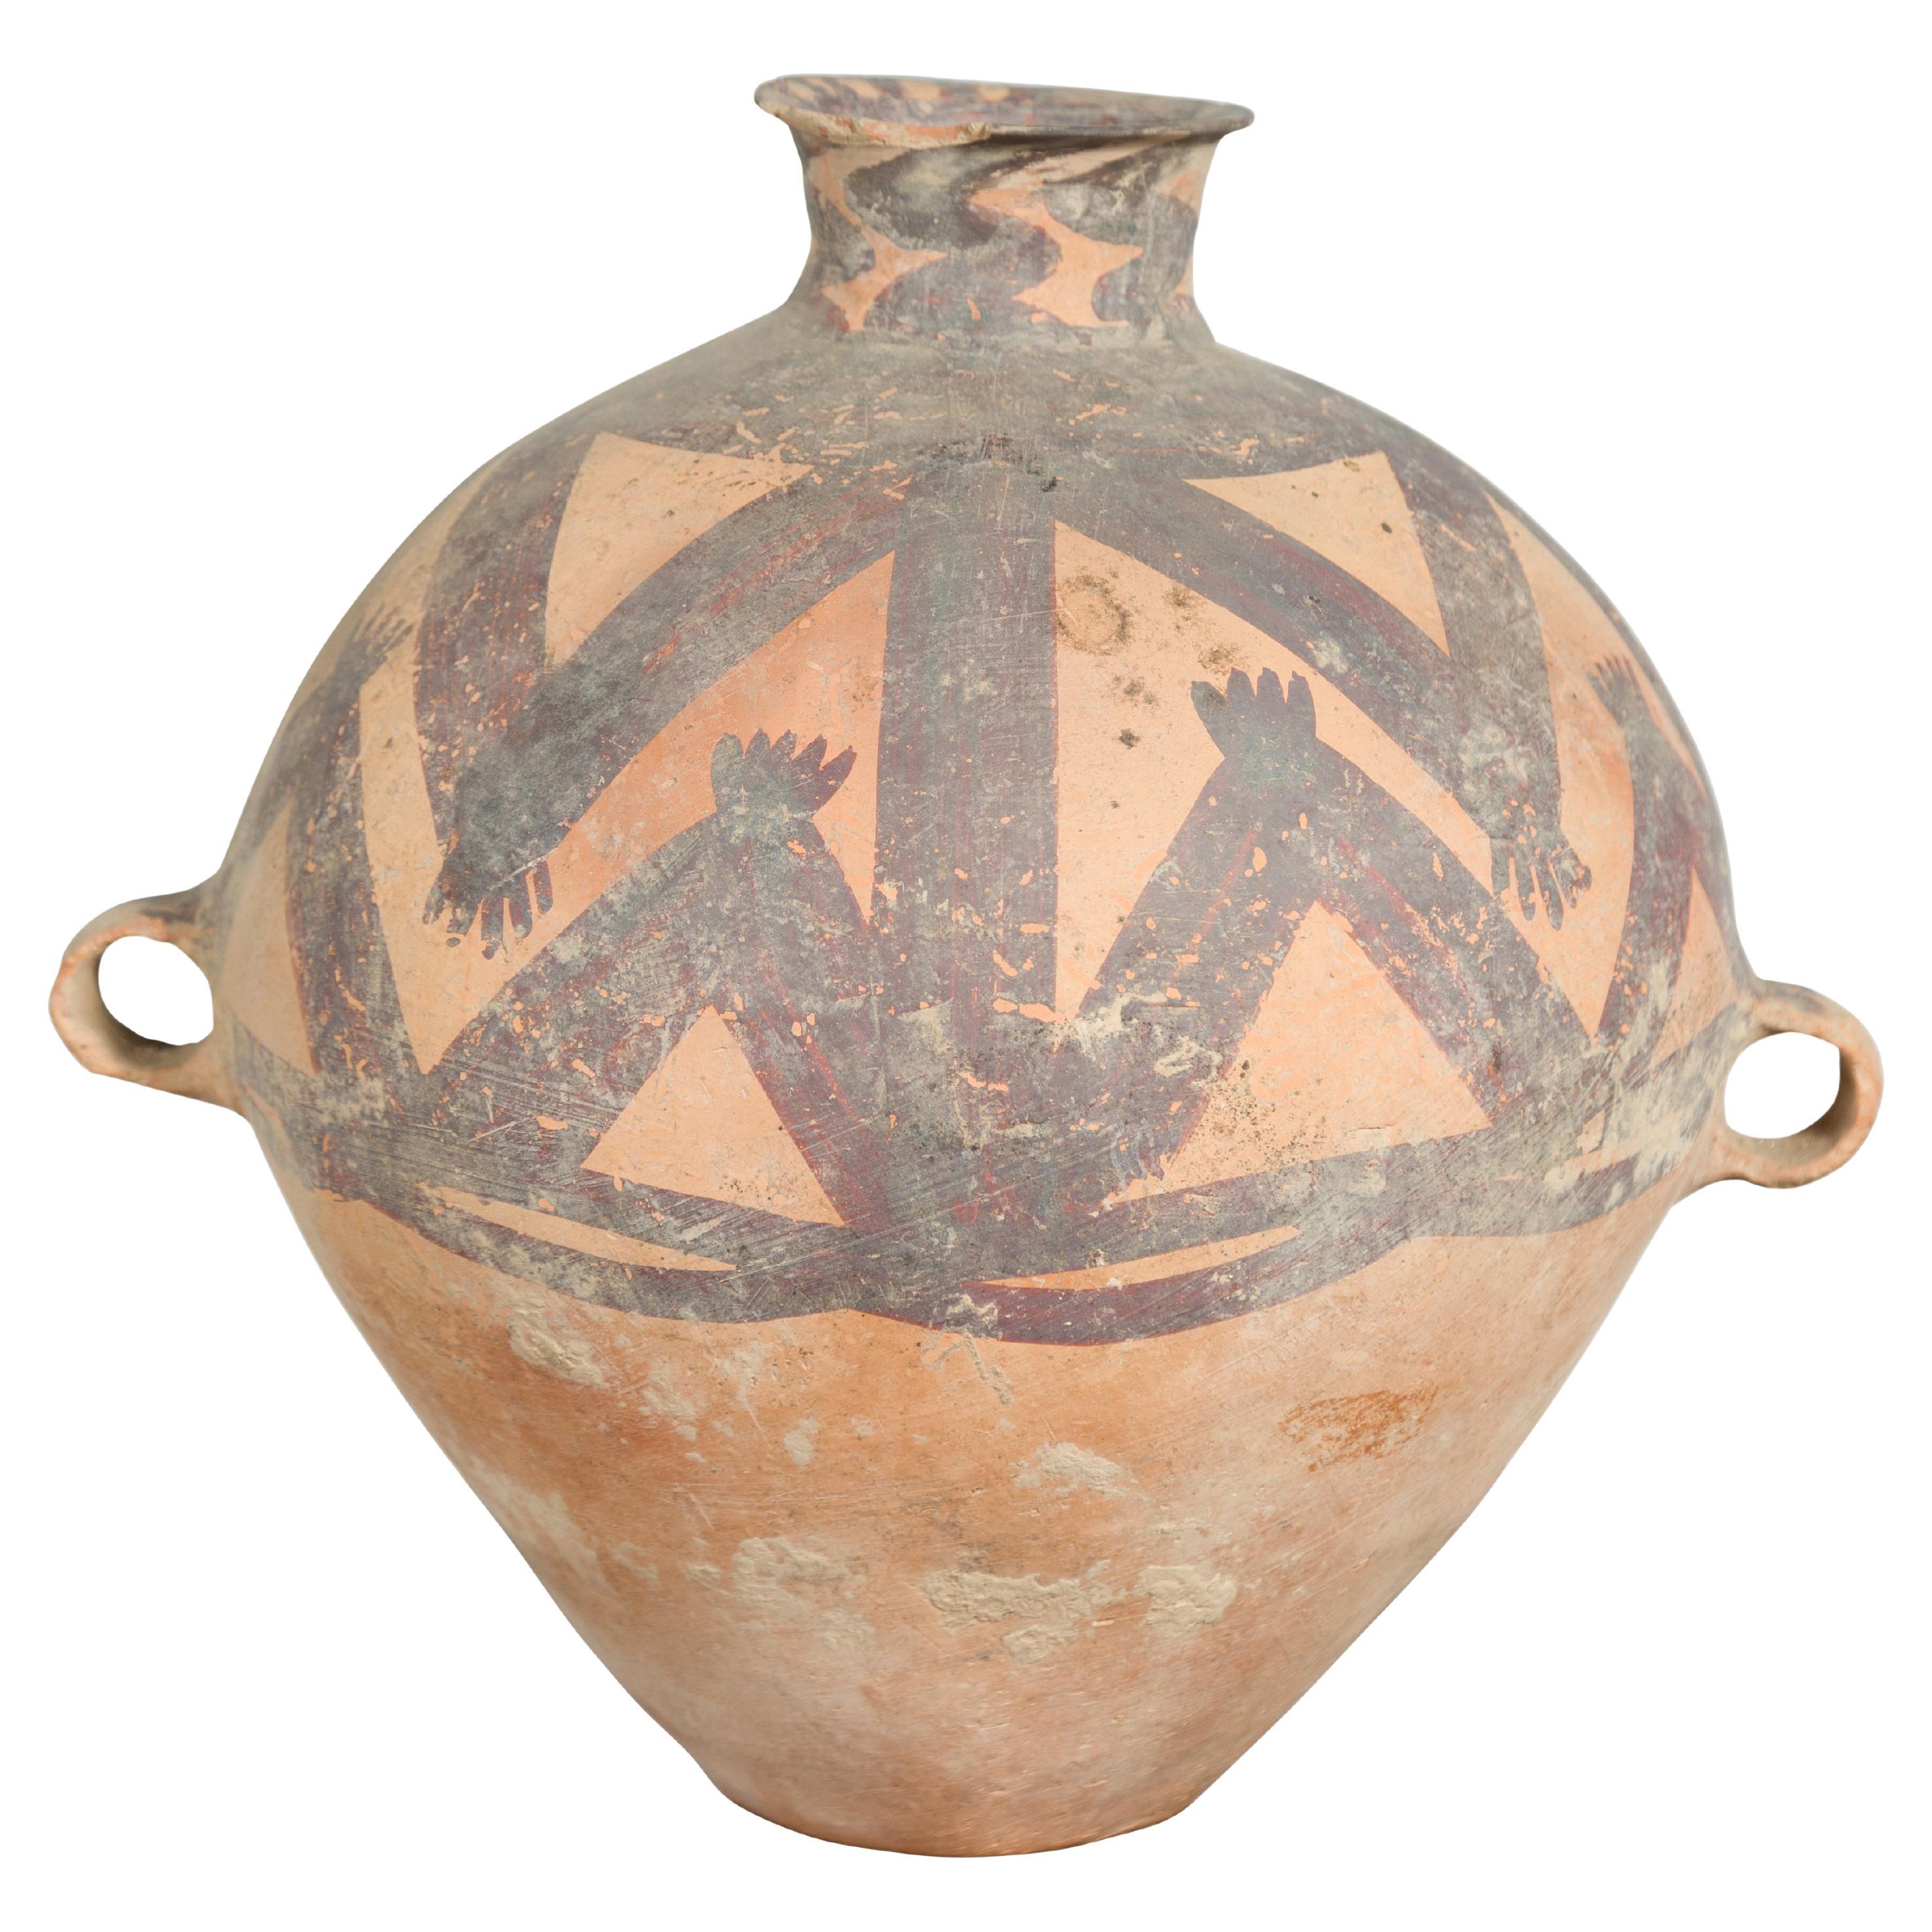 Chinese Neolithic Period 4000 BC Terracotta Storage Jar with Geometric Décor